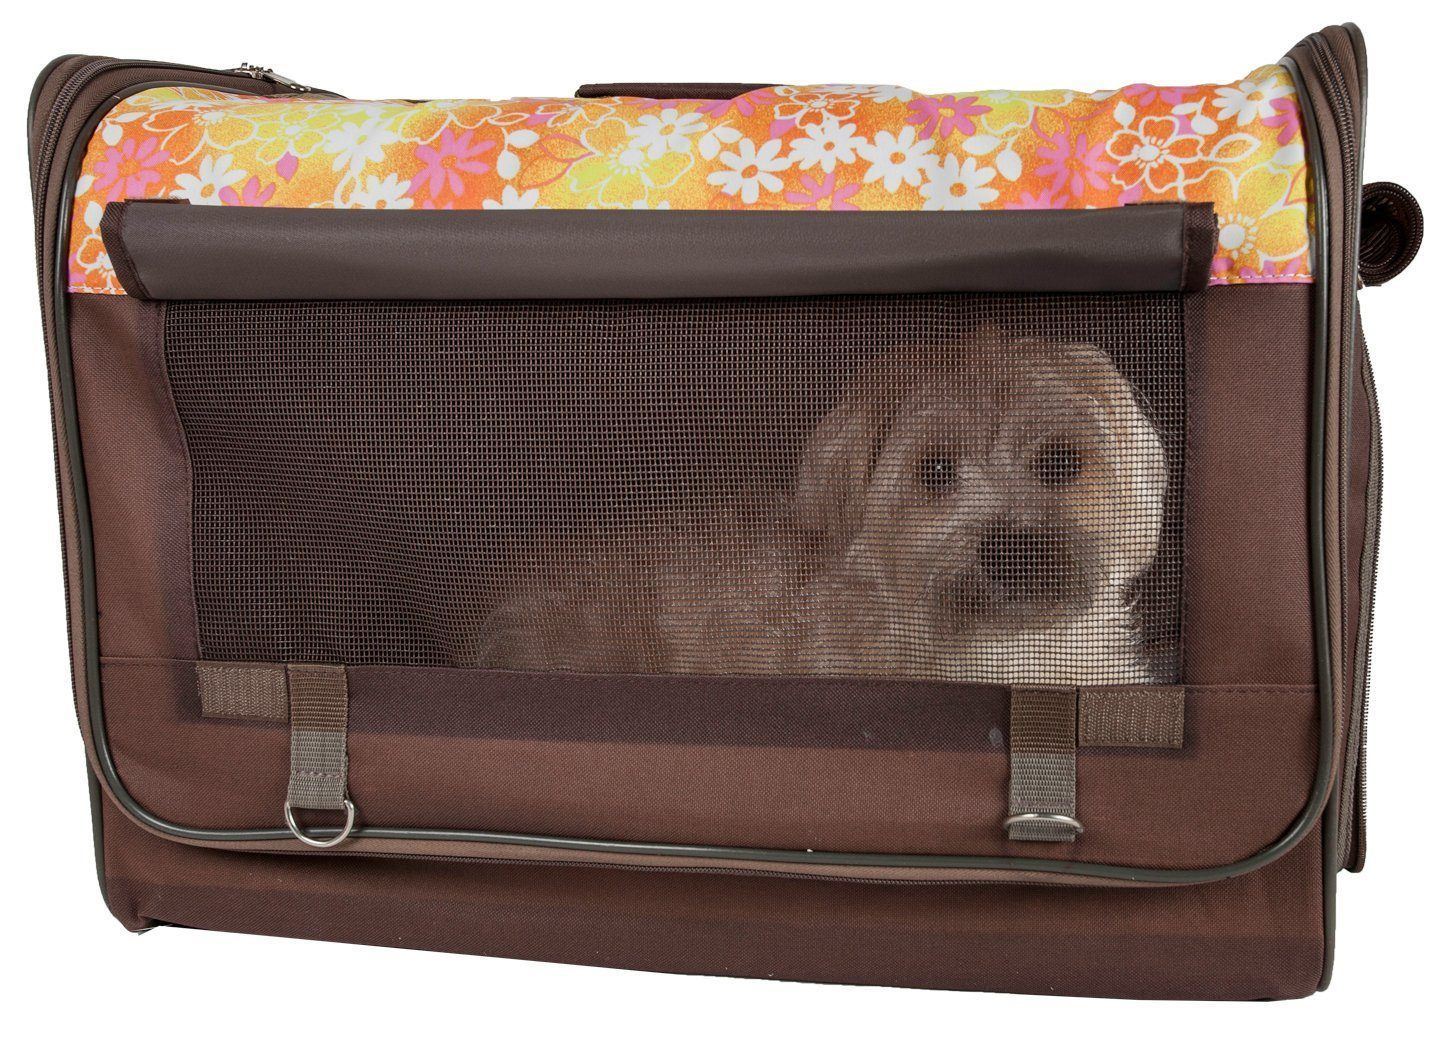 Pet Life ® 'Floral Patterned' Folding Collapsible Lightweight Wire Framed Pet Dog Crate House Tent  